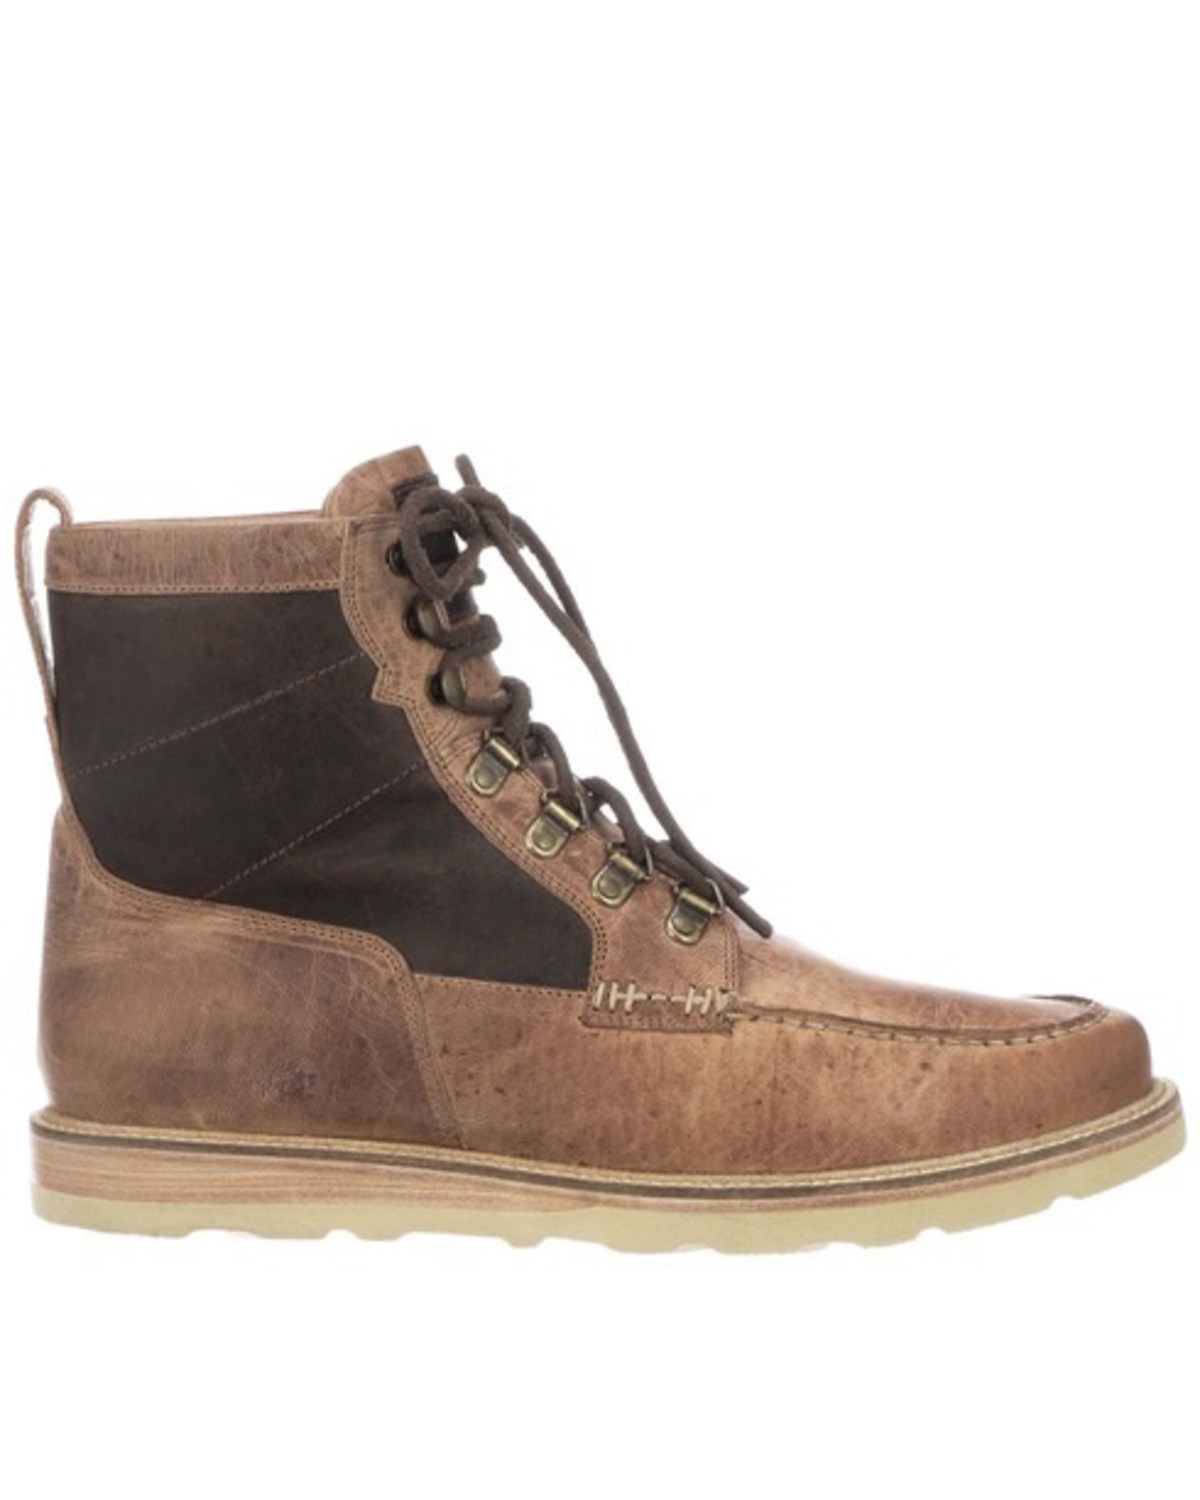 Lucchese Men's Lace-Up Range Boot - Moc Toe | Boot Barn